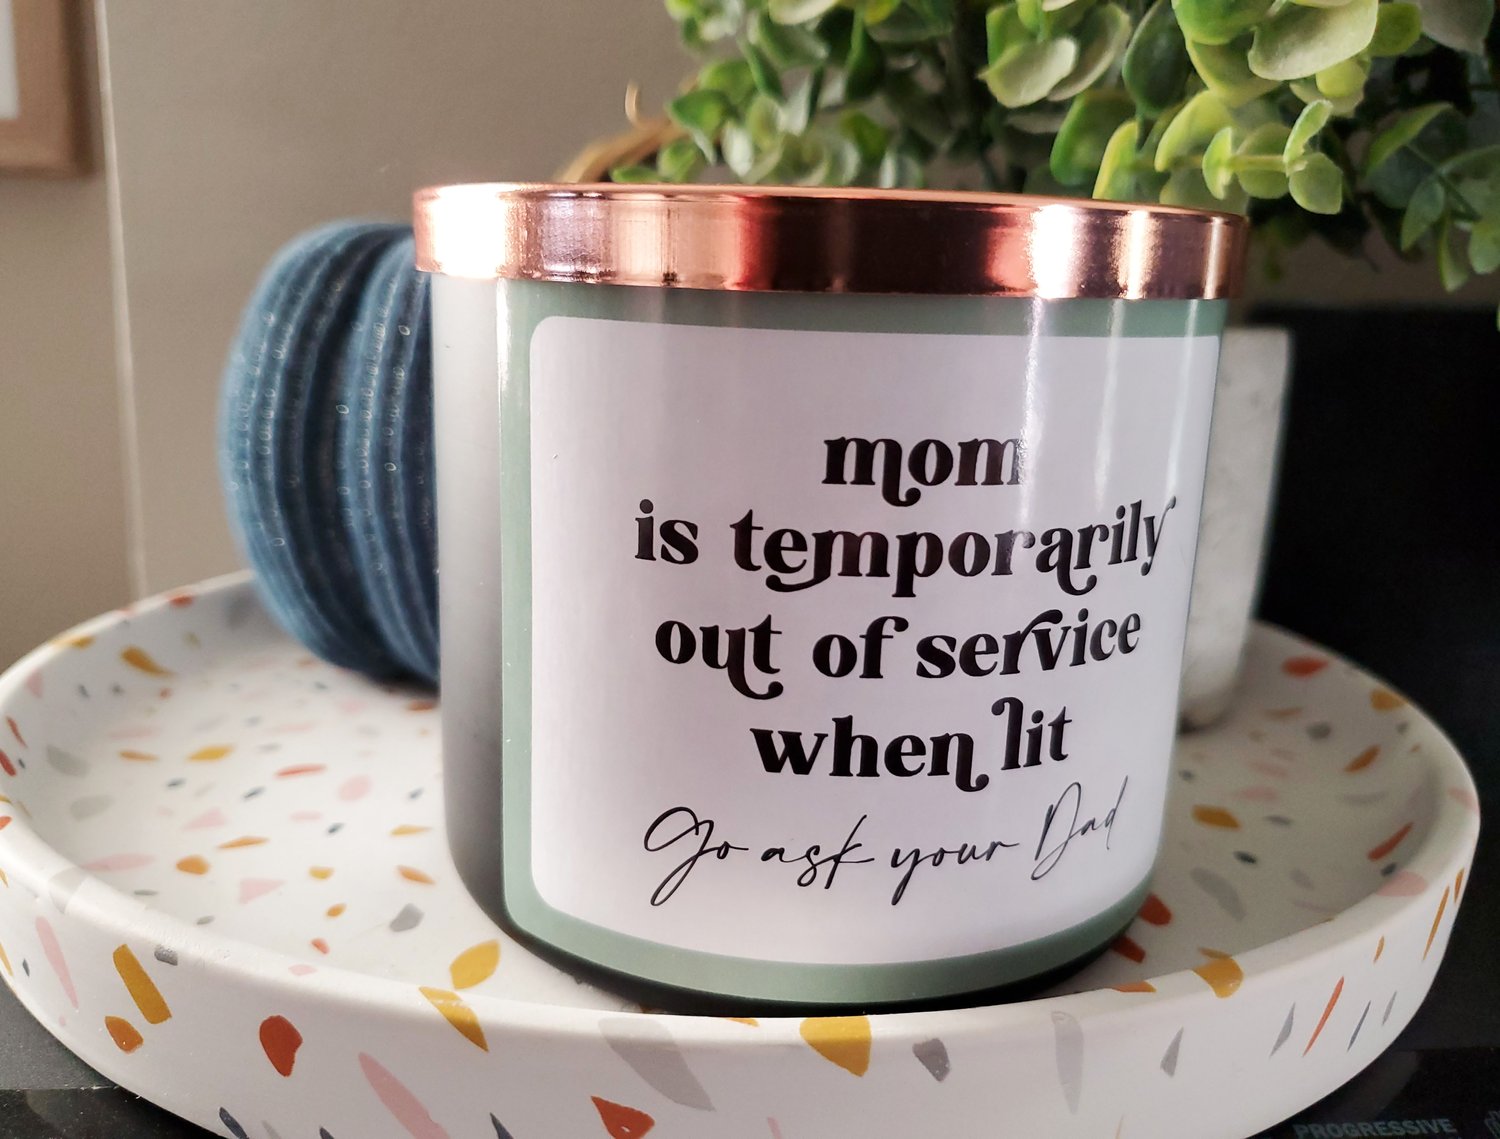 Funny Candle for Mom - If this Candle is Lit, Ask Dad